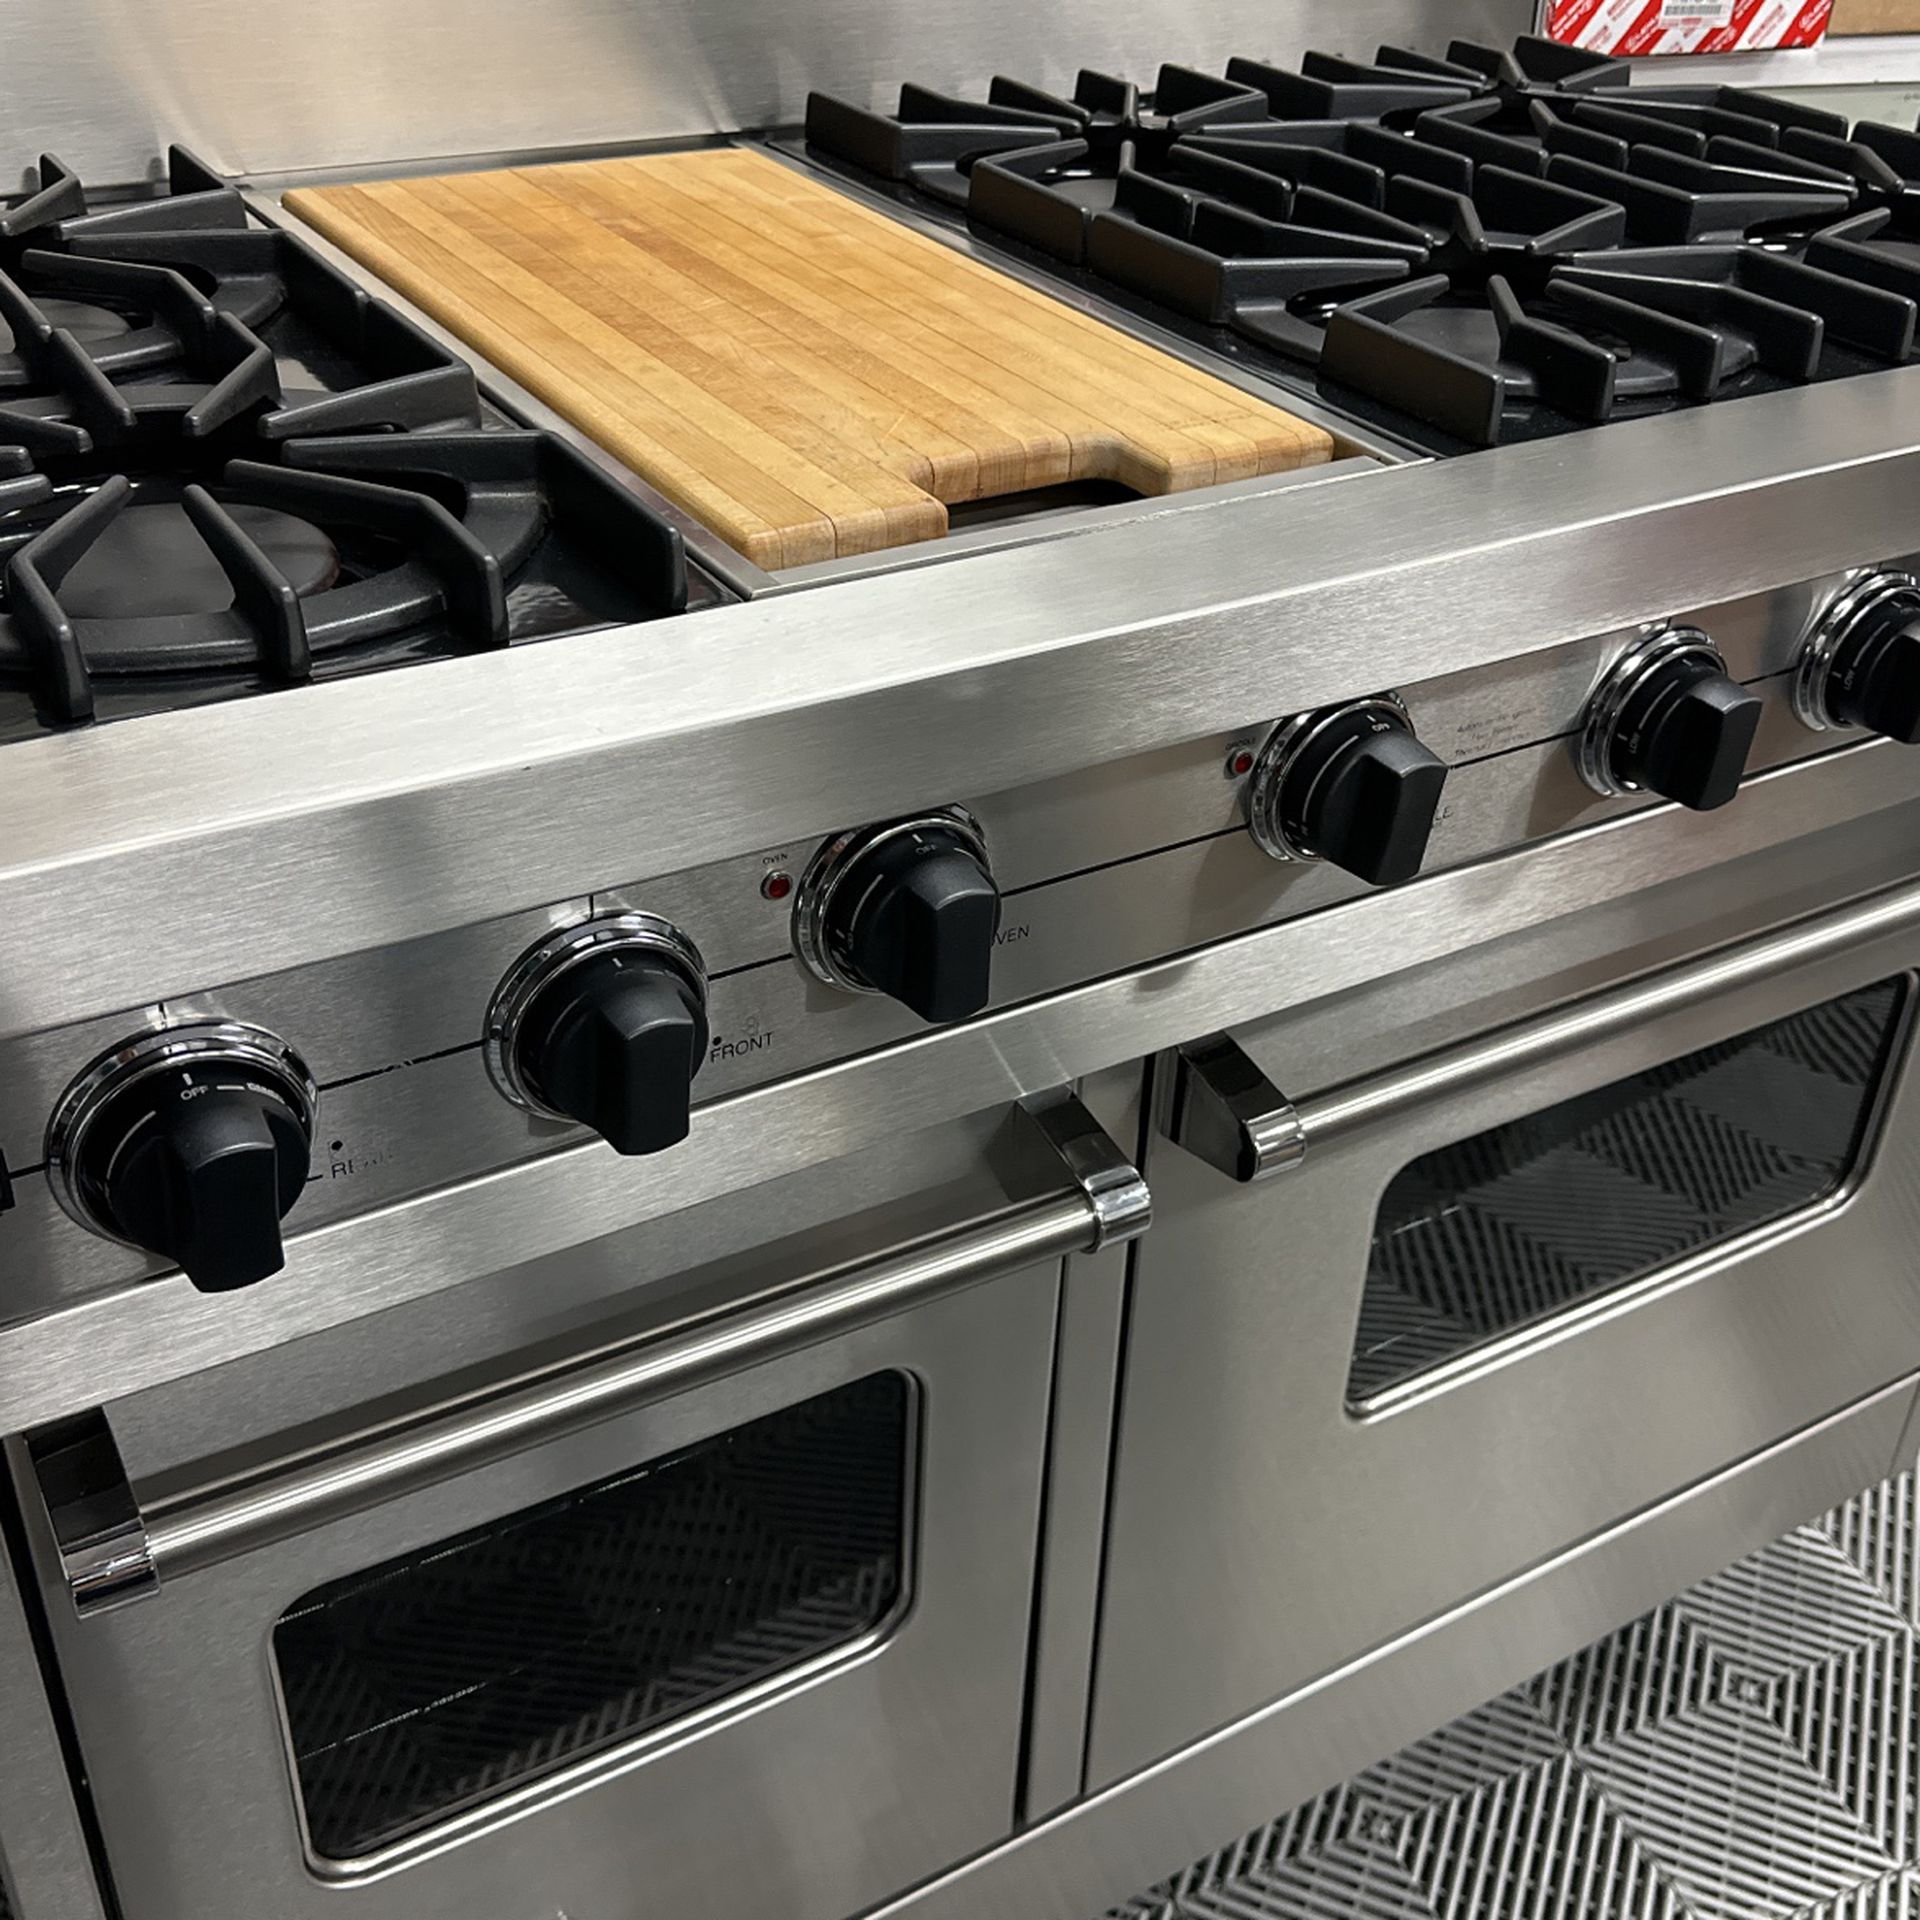 VIKING PROFESSIONAL 48” Range with Double Ovens + Griddle